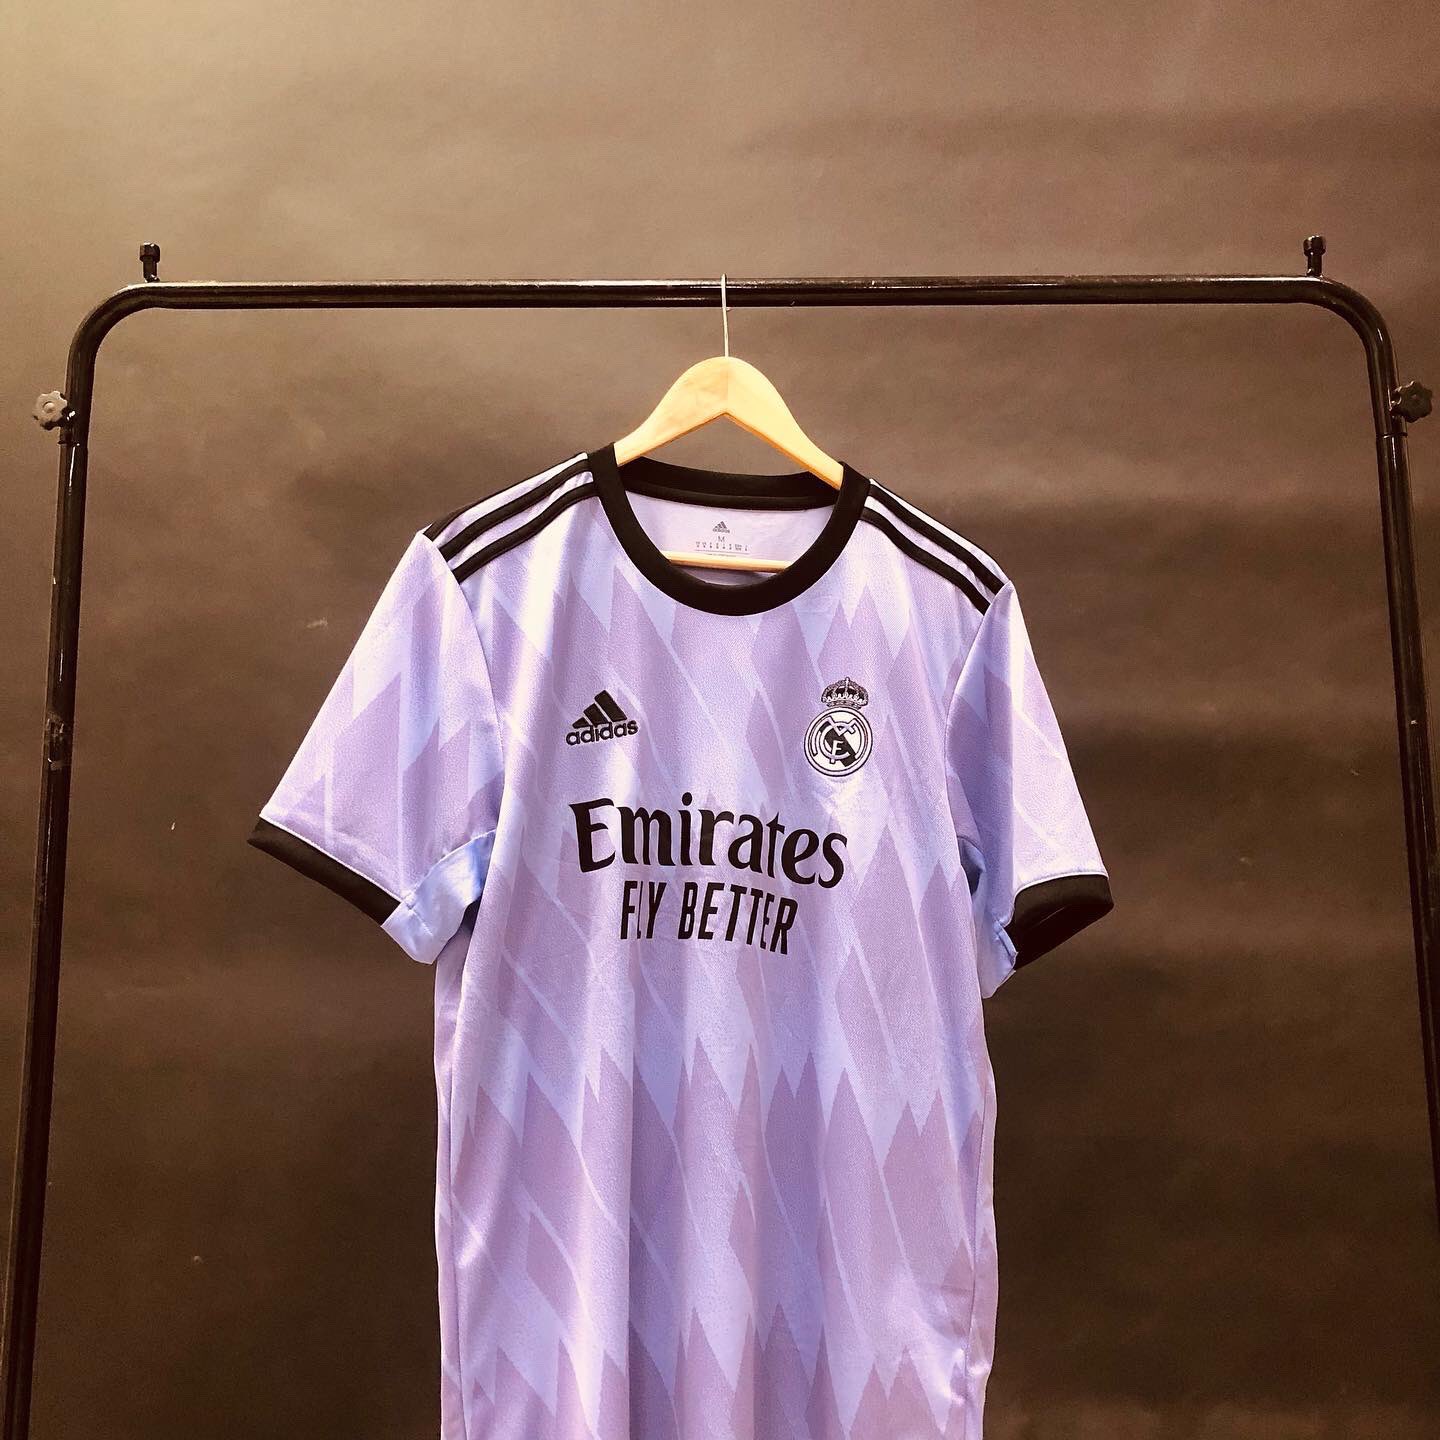 TheKitman.co.uk on Twitter: "#Kitnews from #LaLiga as images have appeared  online of what's thought to be the 2022-23 #RealMadrid away shirt made by  #Adidas. ⚽️👕 Most likely a fake based on the